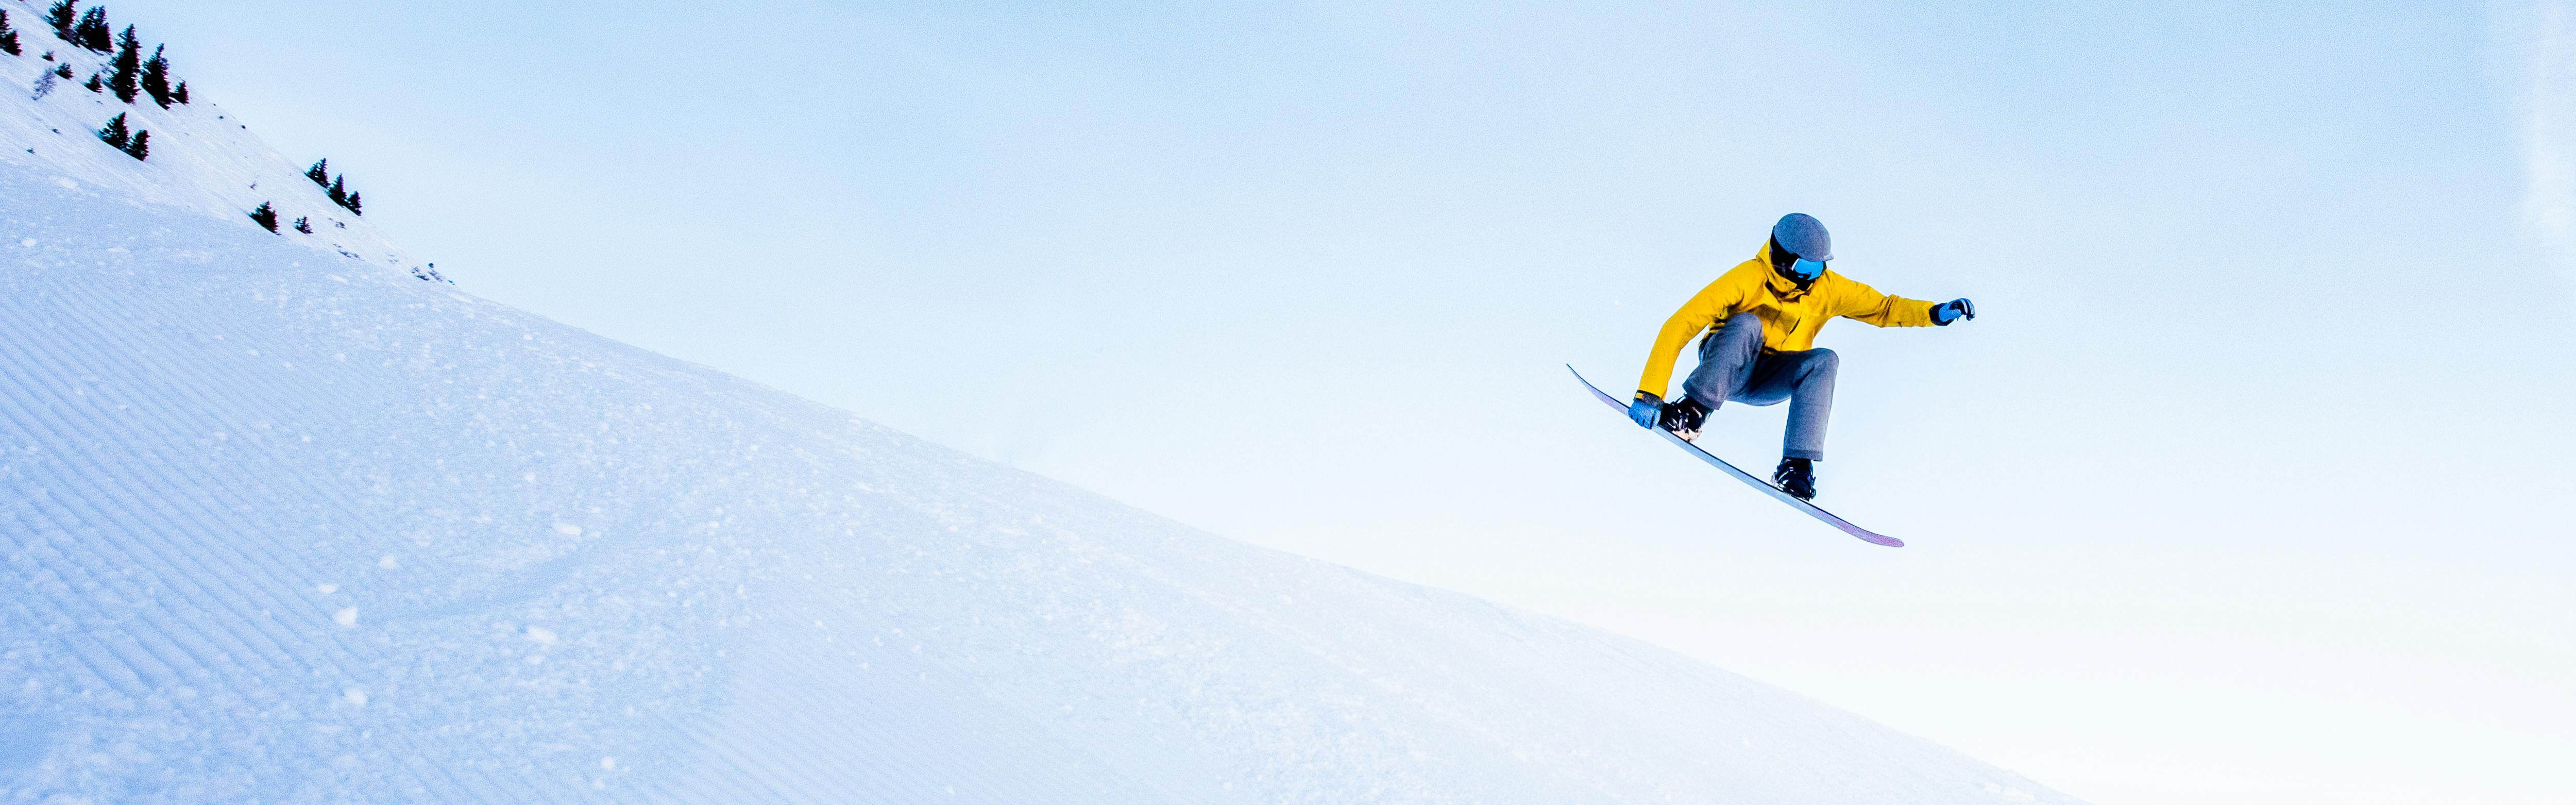 A snowboarder in a yellow jacket does a jump off a groomer trail as he grabs his snowboard. 